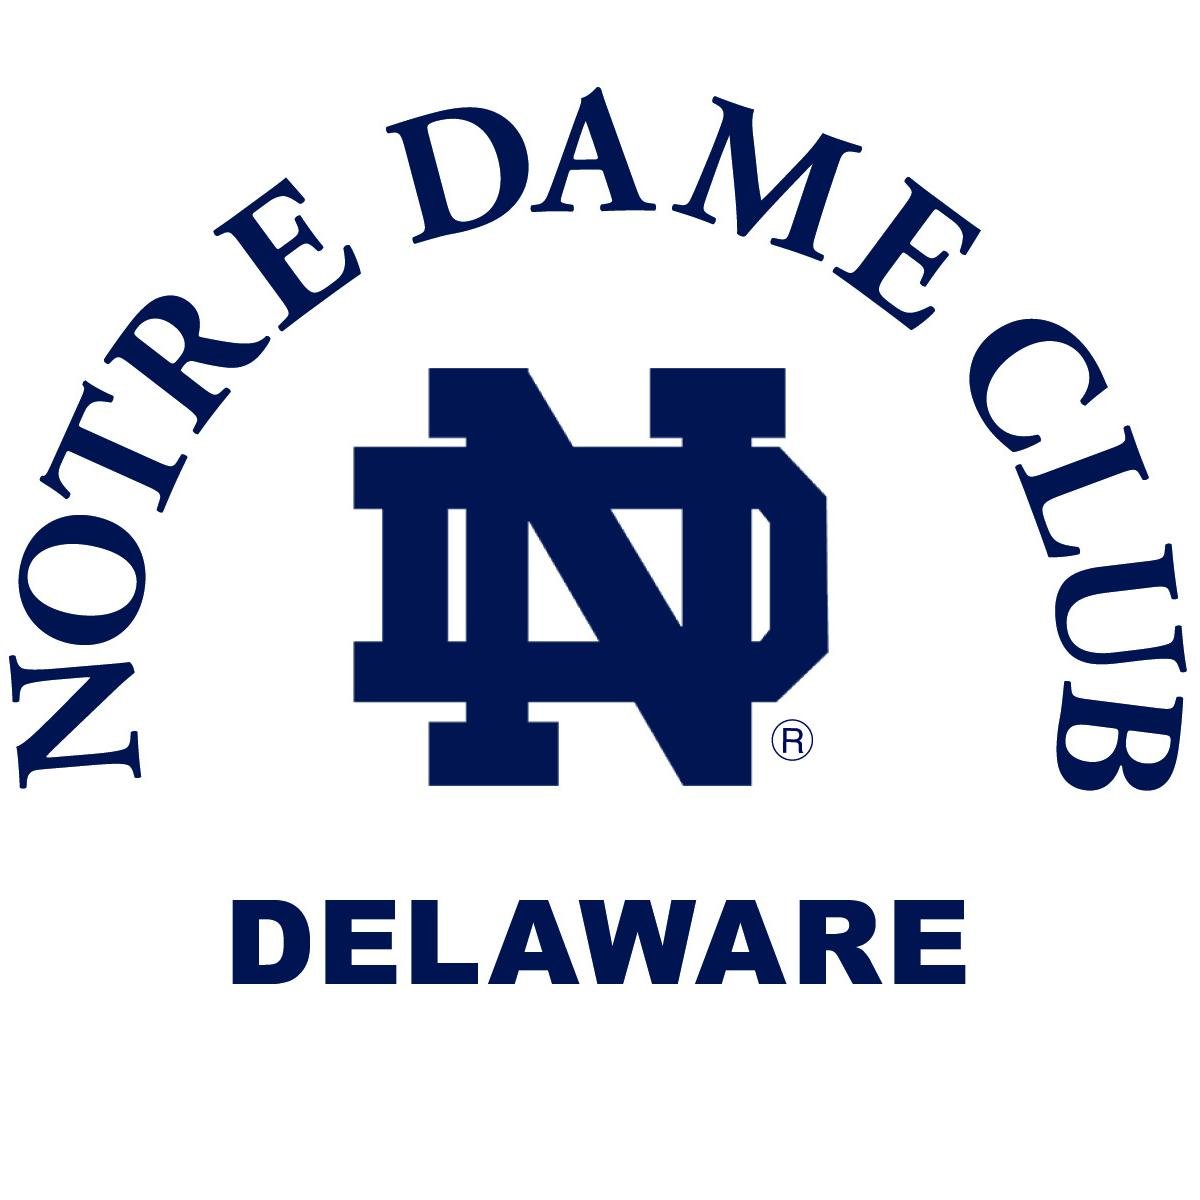 From charity events to lectures to football game watches, we strive to bring the Notre Dame experience to Delaware.  Go Irish!